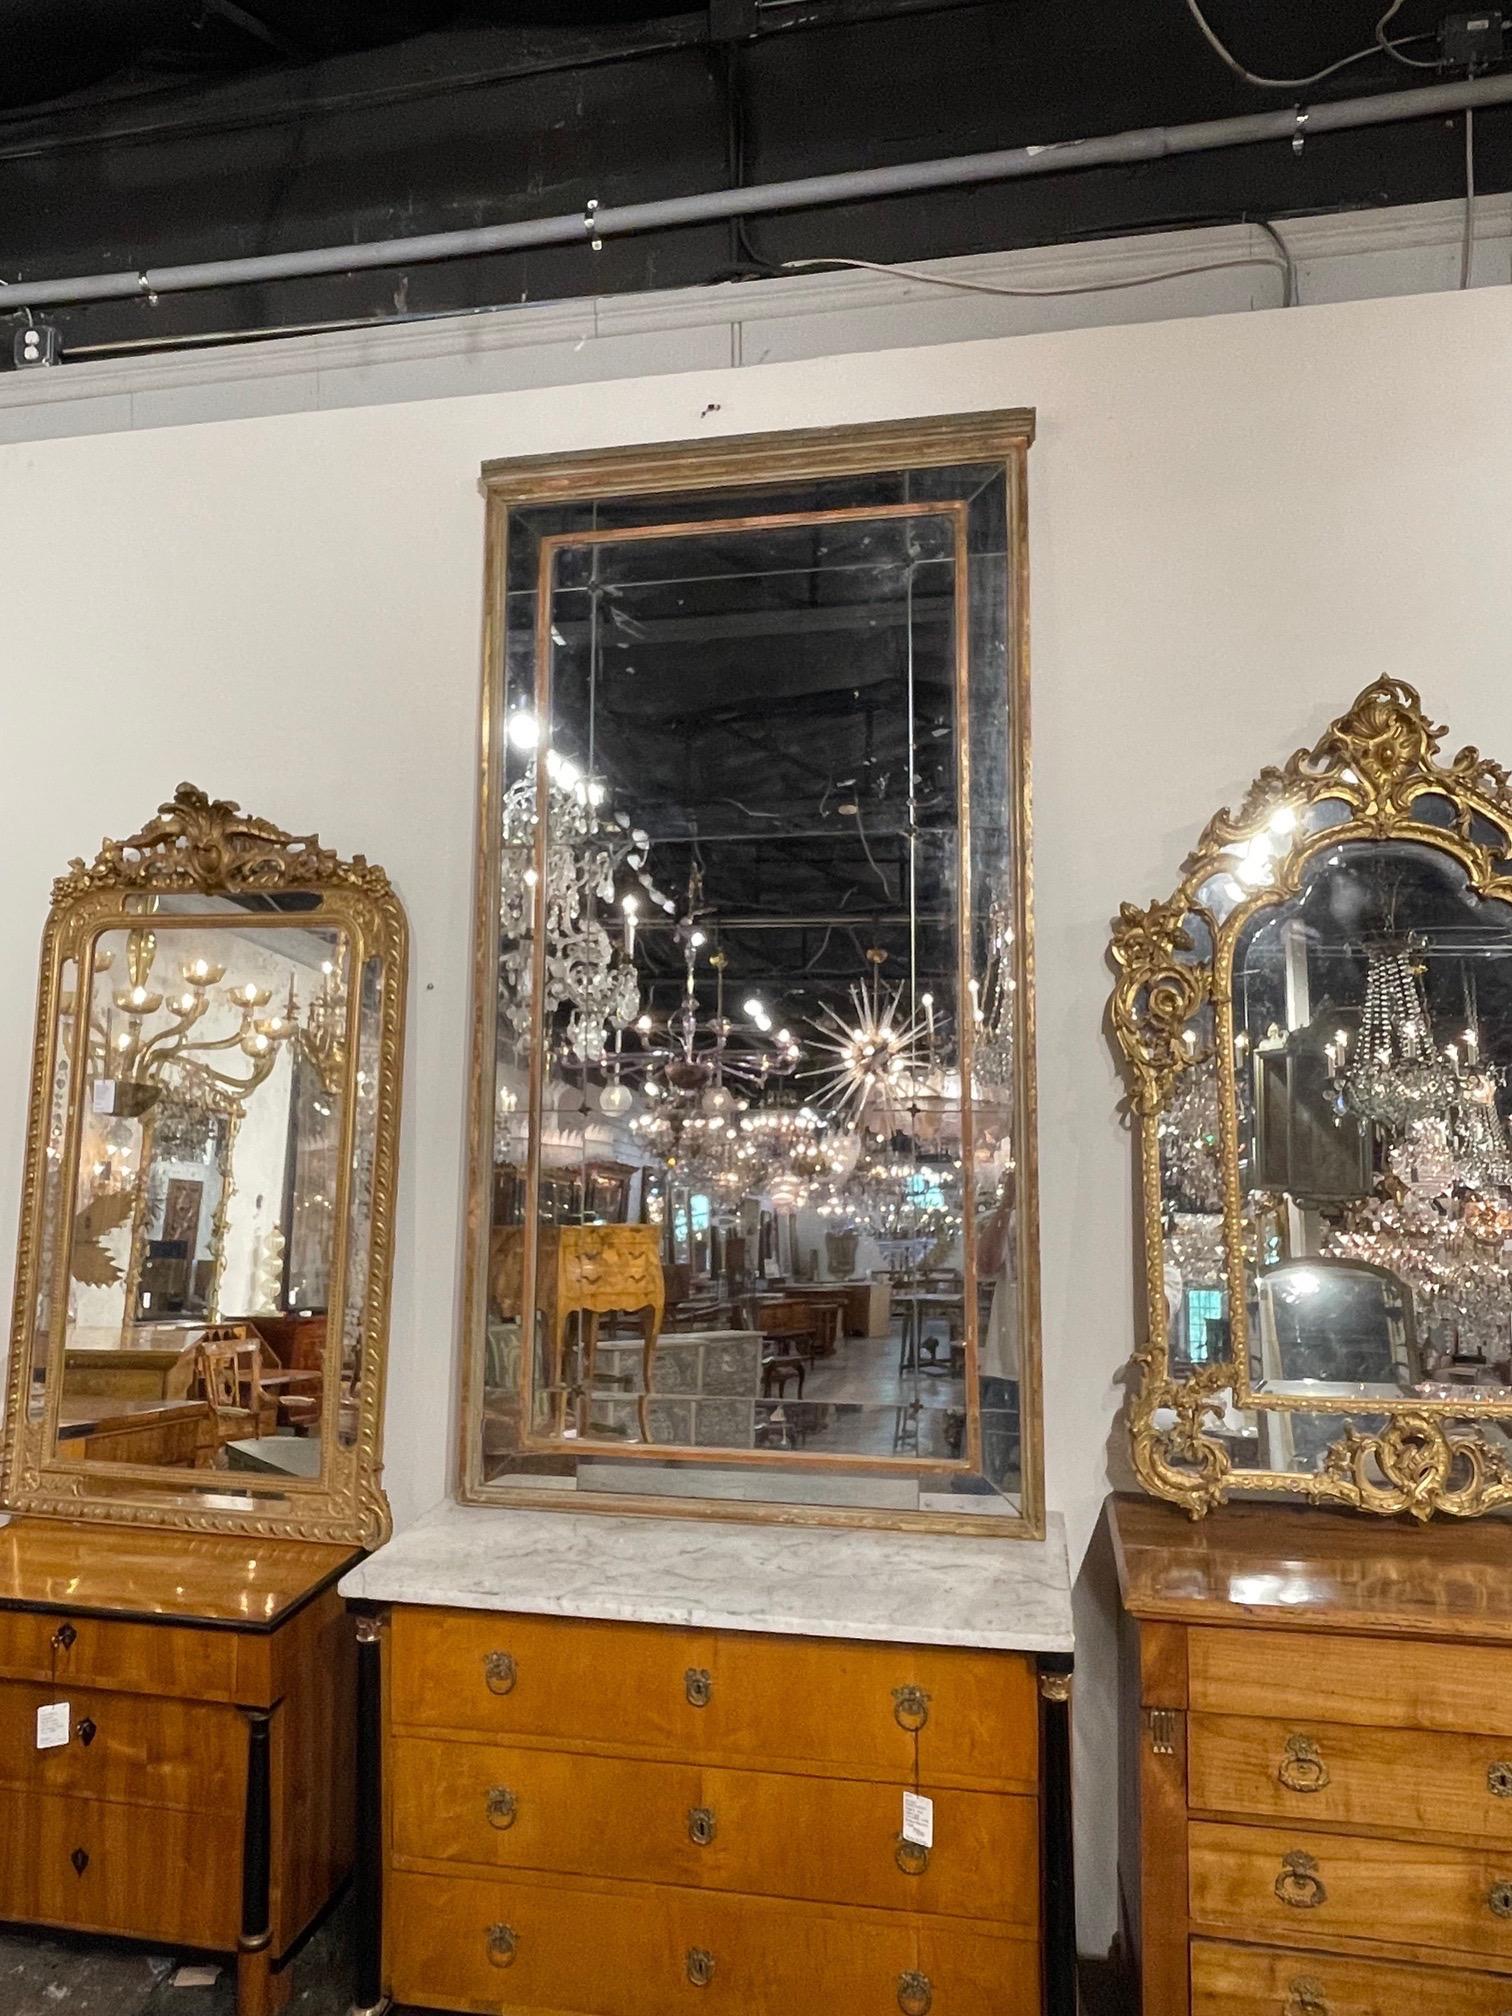 Superb large scale 19th century French Directoire period mirror with original divided mercury glass. Creates a beautiful presence. Very special!